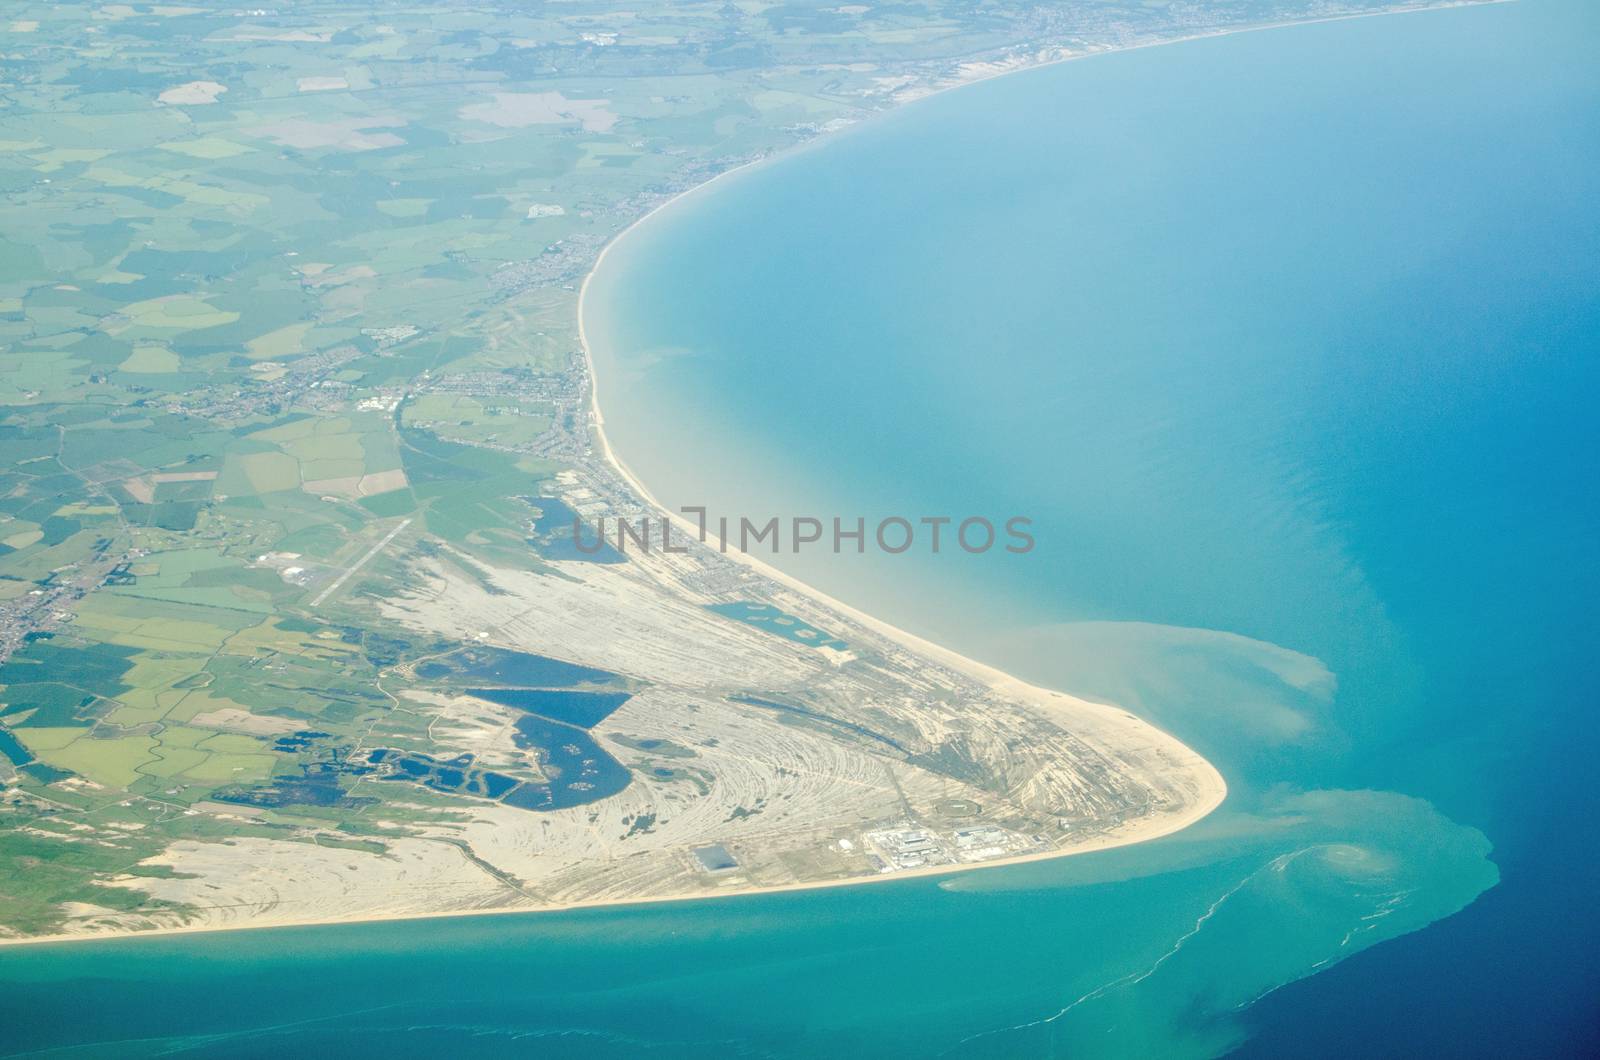 Dungeness aerial view by BasPhoto